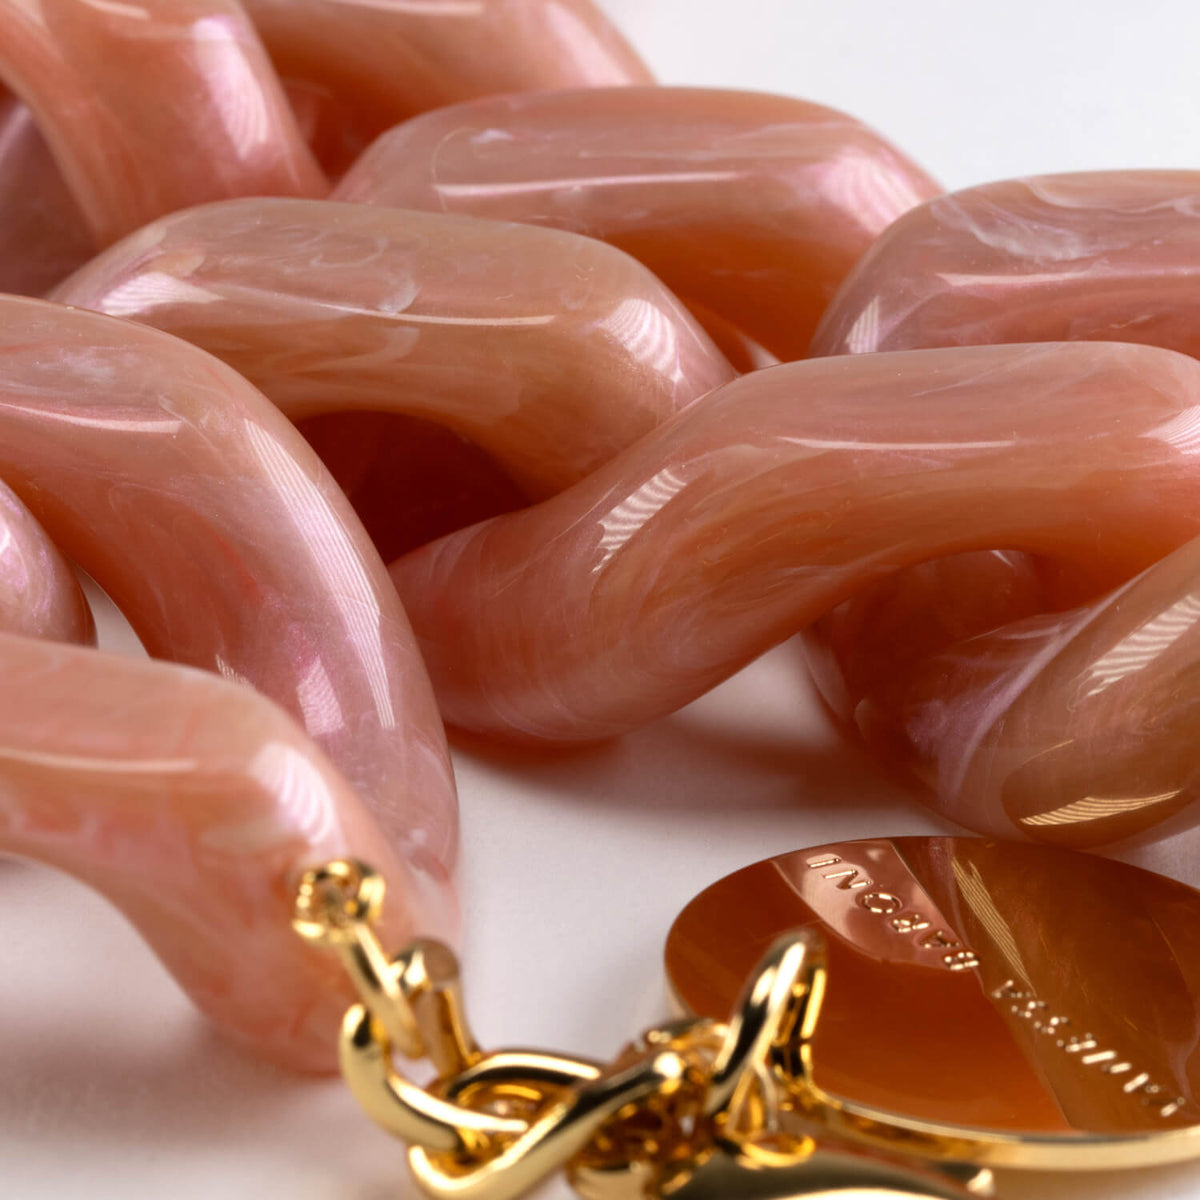 BIG Flat Chain Necklace Peach Marble